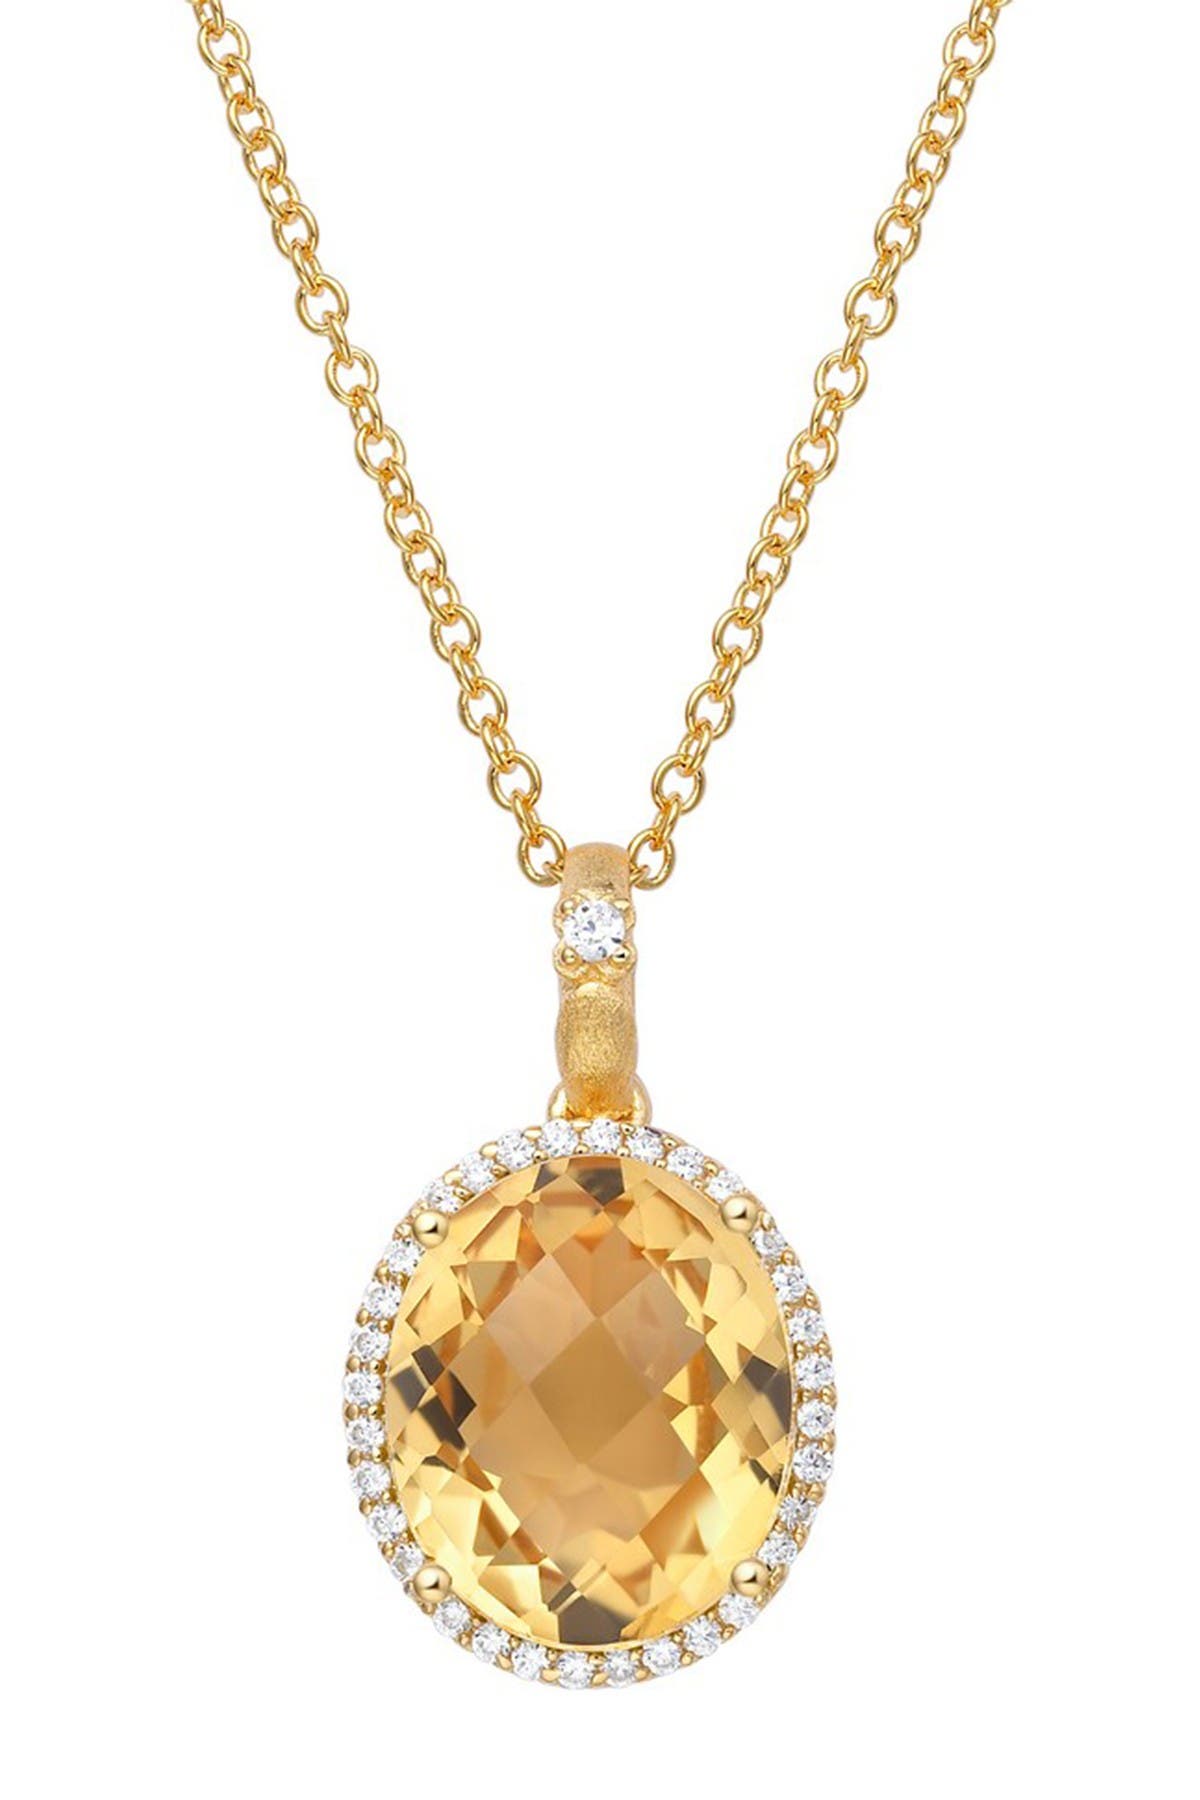 Lafonn Gold Plated Sterling Silver Round Cut Simulated Diamond Pendant Chain Necklace In White-citrine